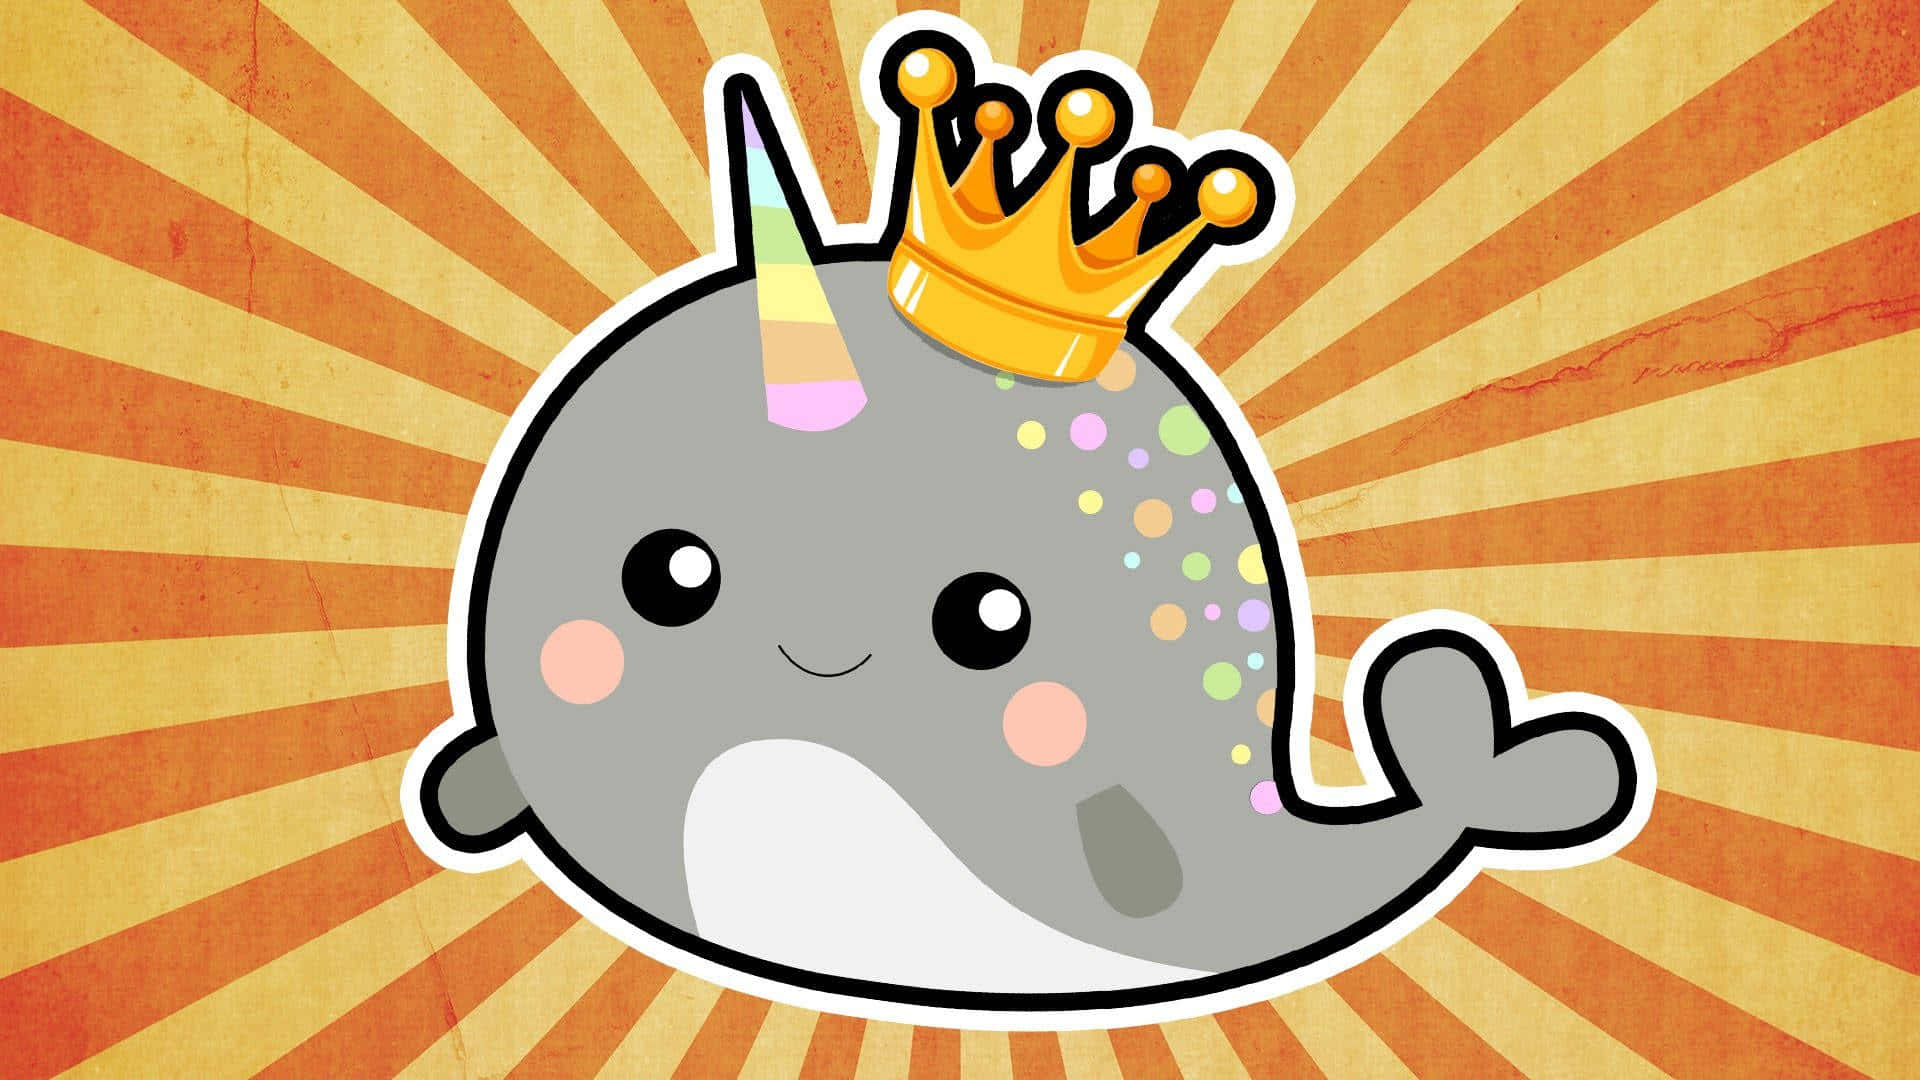 "Dive deep into the ocean and discover the majestic narwhal"